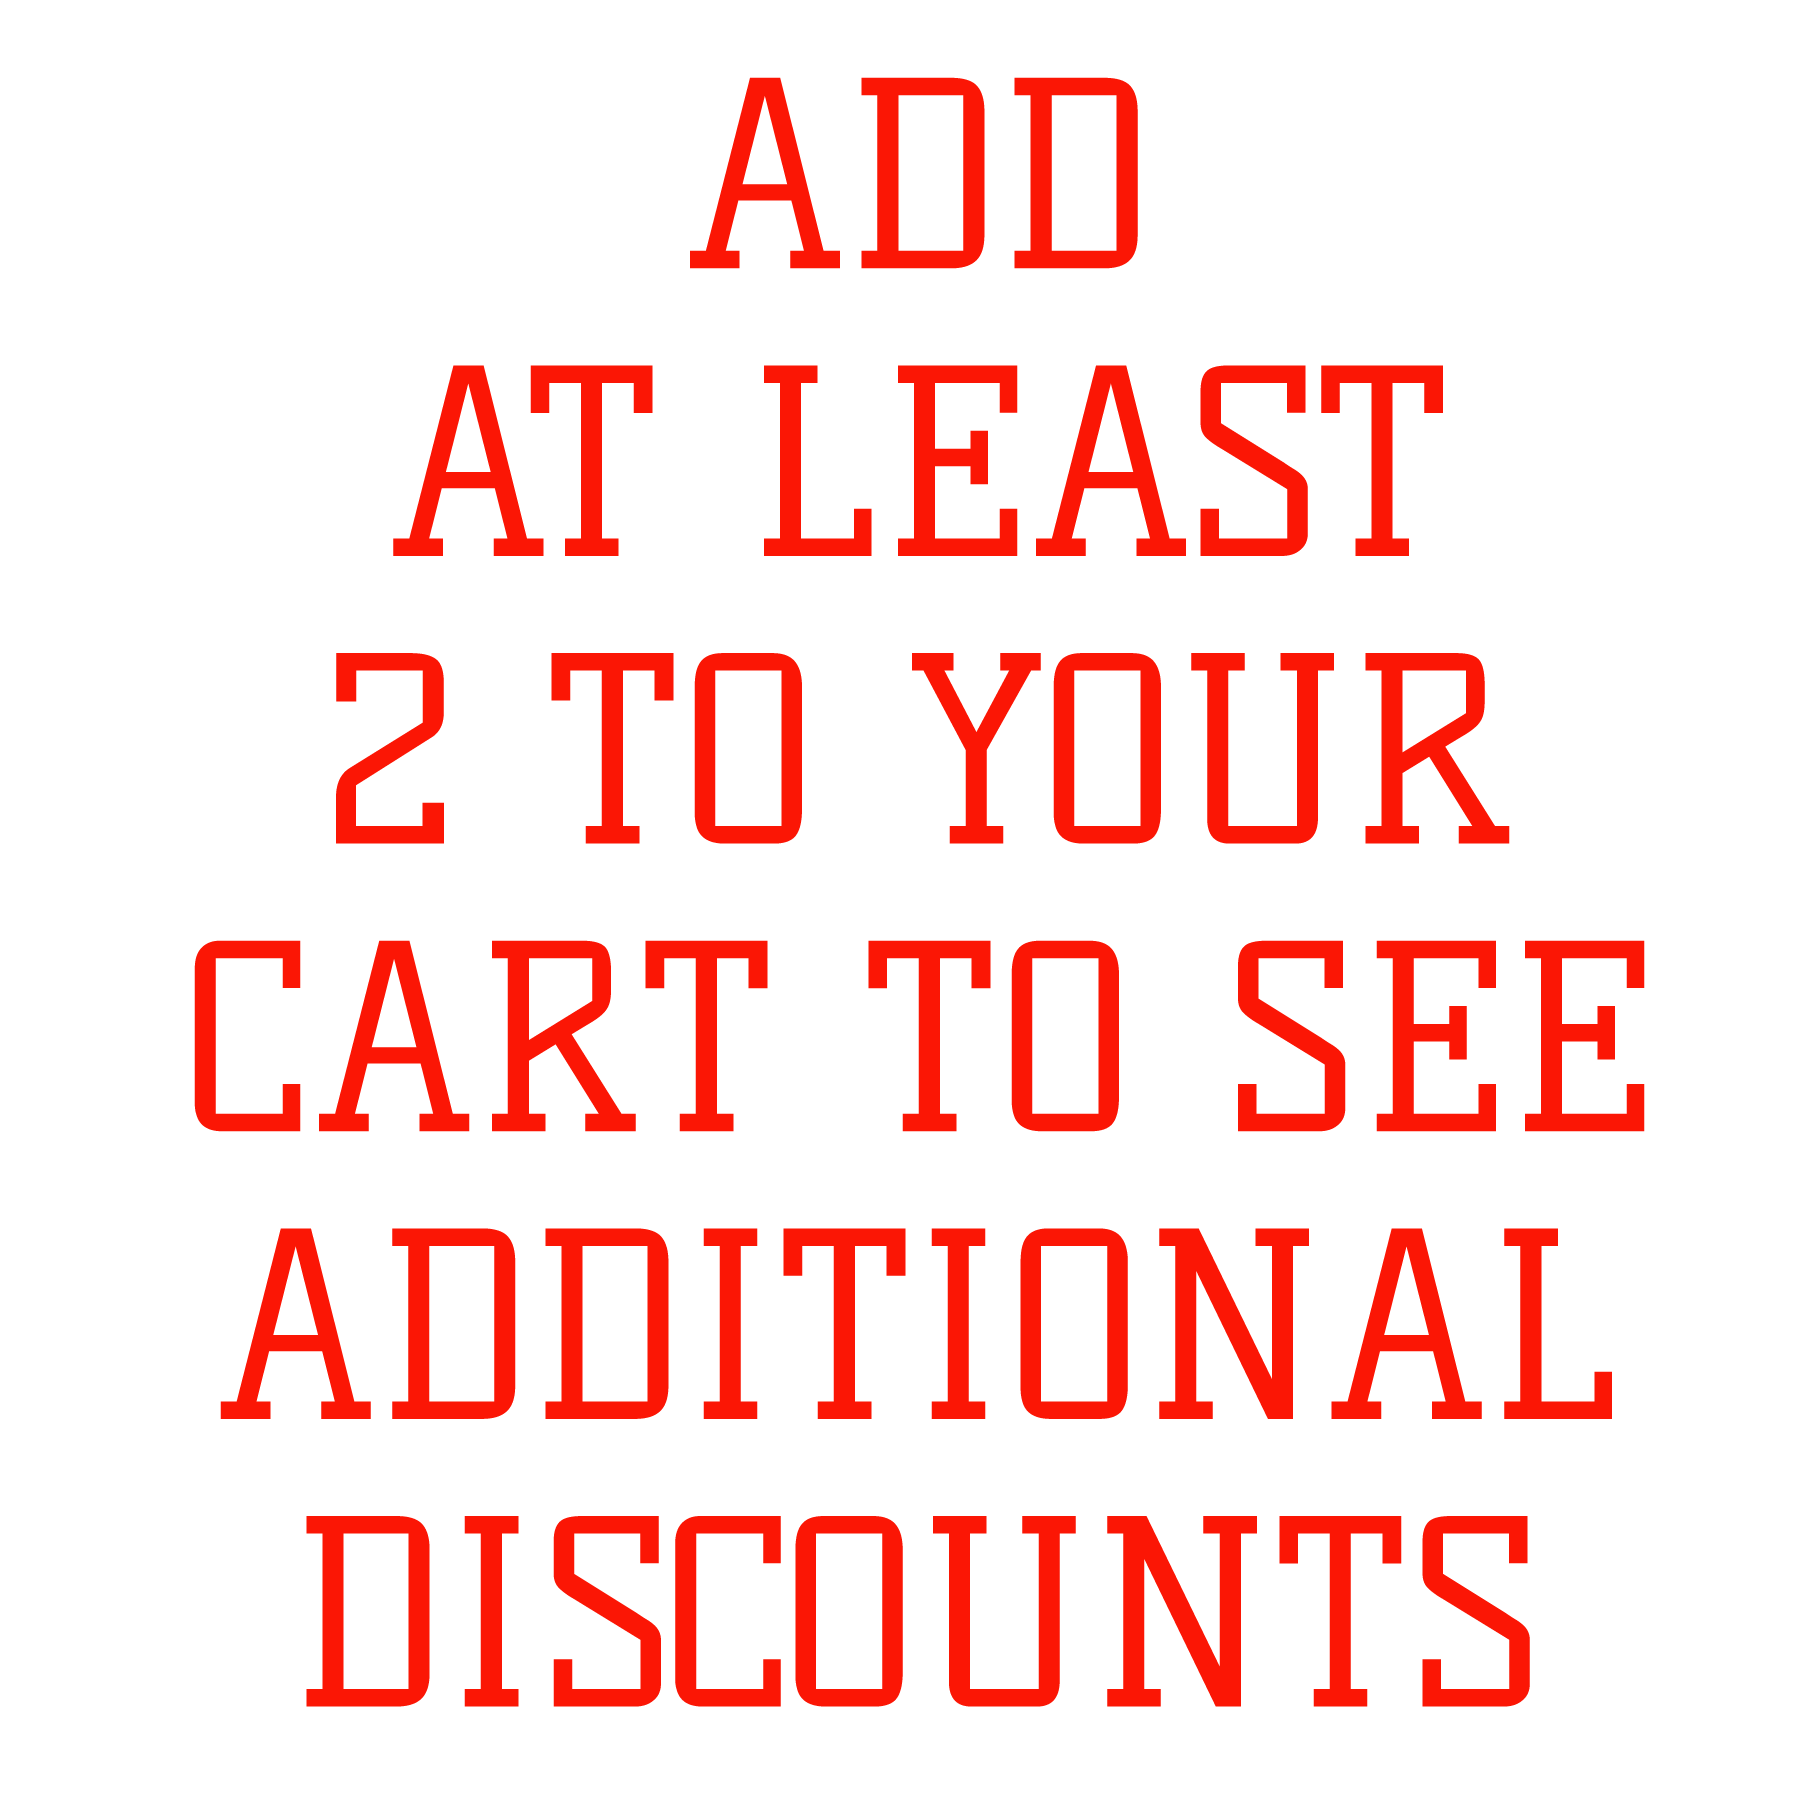 Add 2 or more to your cart to see discounts